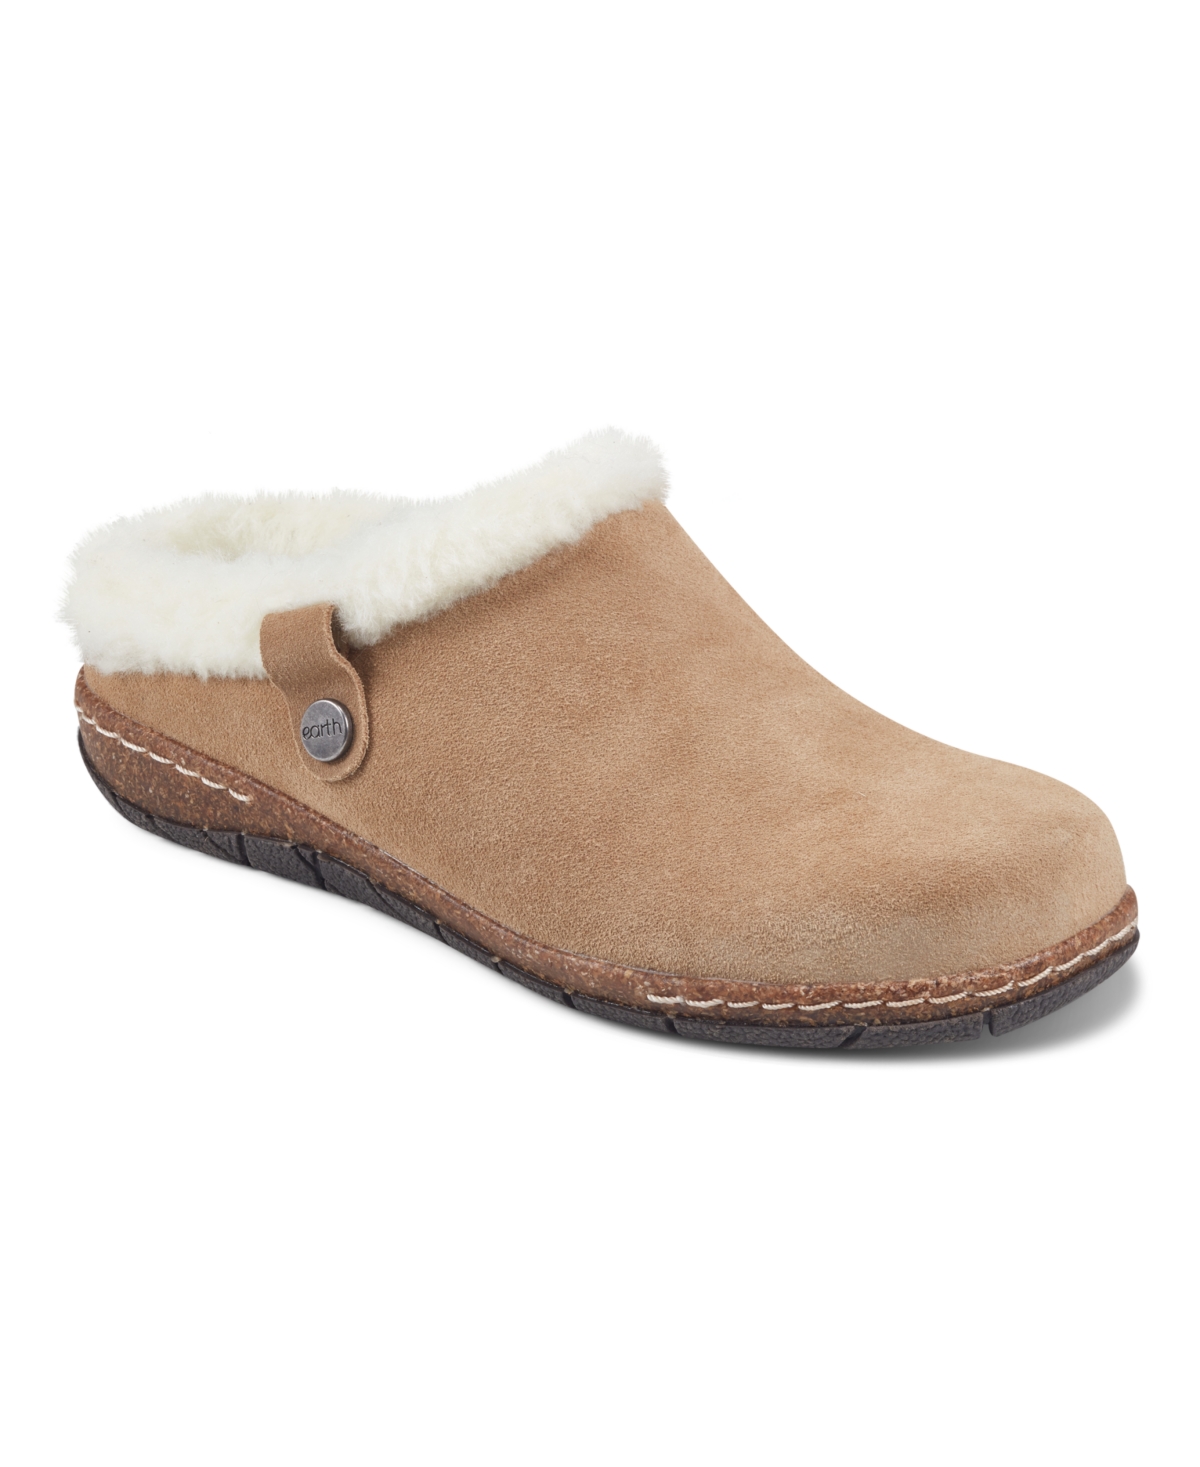 Earth Women's Elena Cold Weather Round Toe Casual Slip On Clogs In Medium Natural Suede,faux Fur